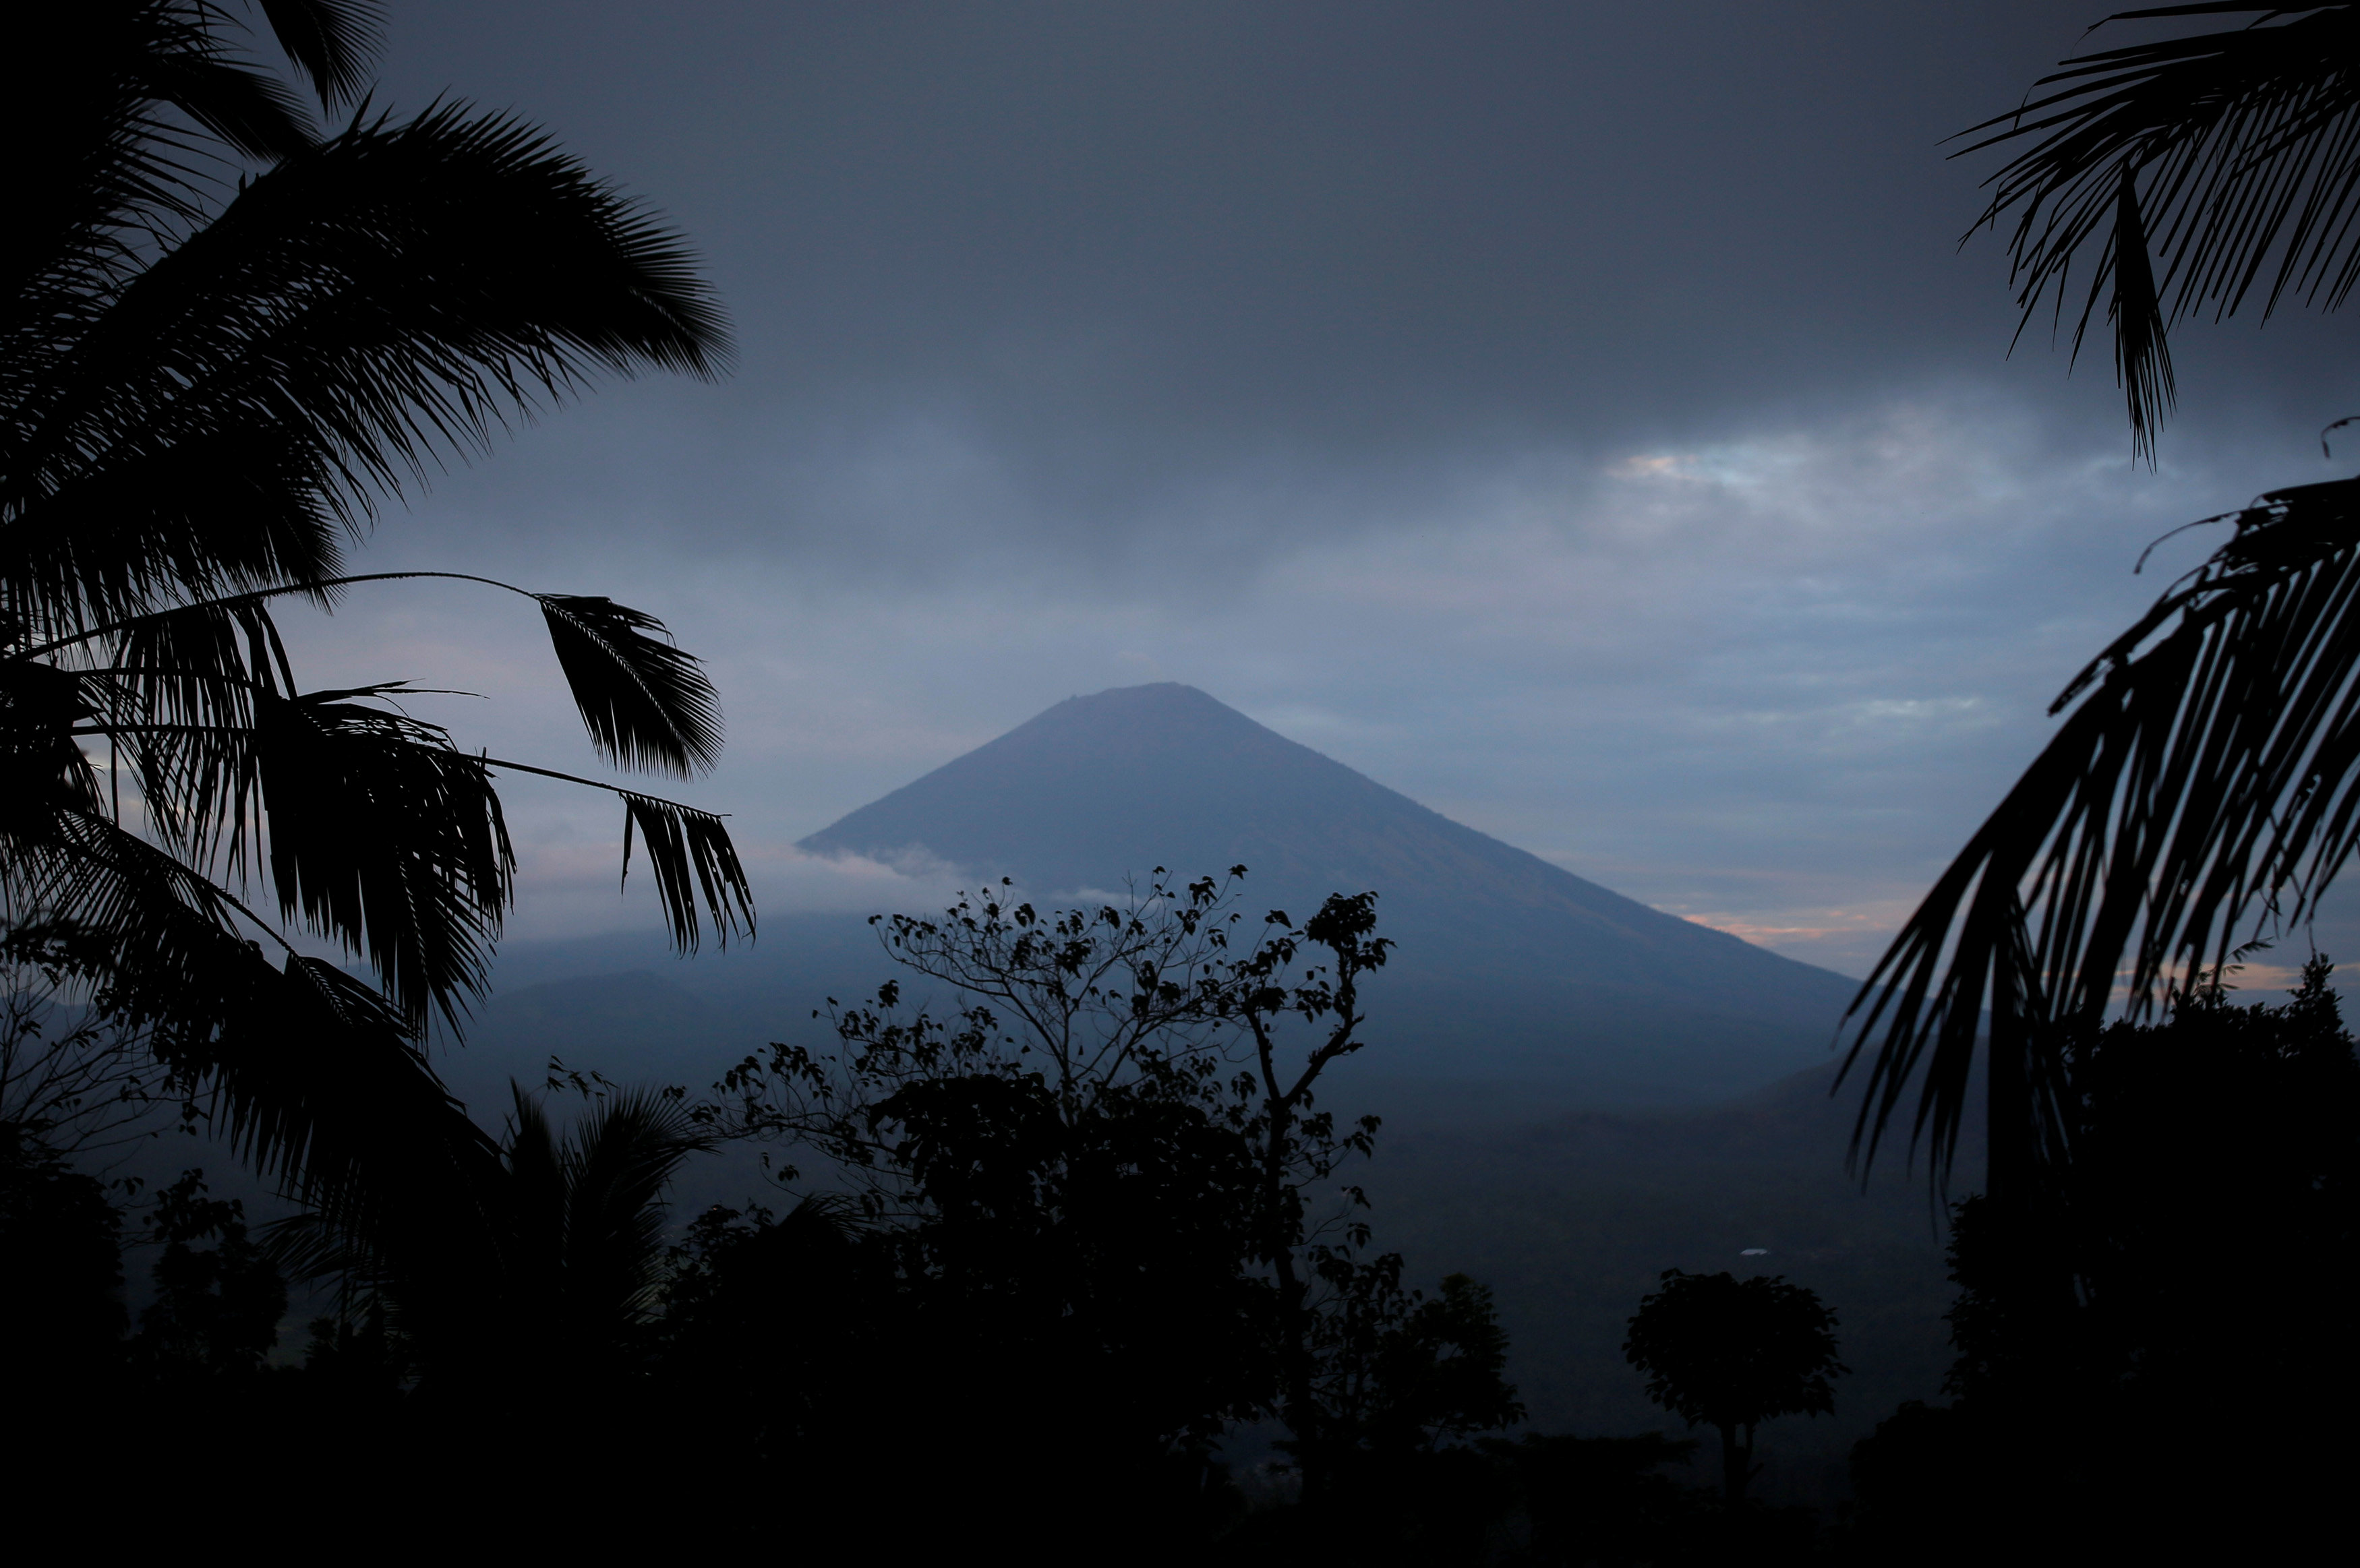 In pictures: Fears as Bali's Mount Agung volcano rumbles